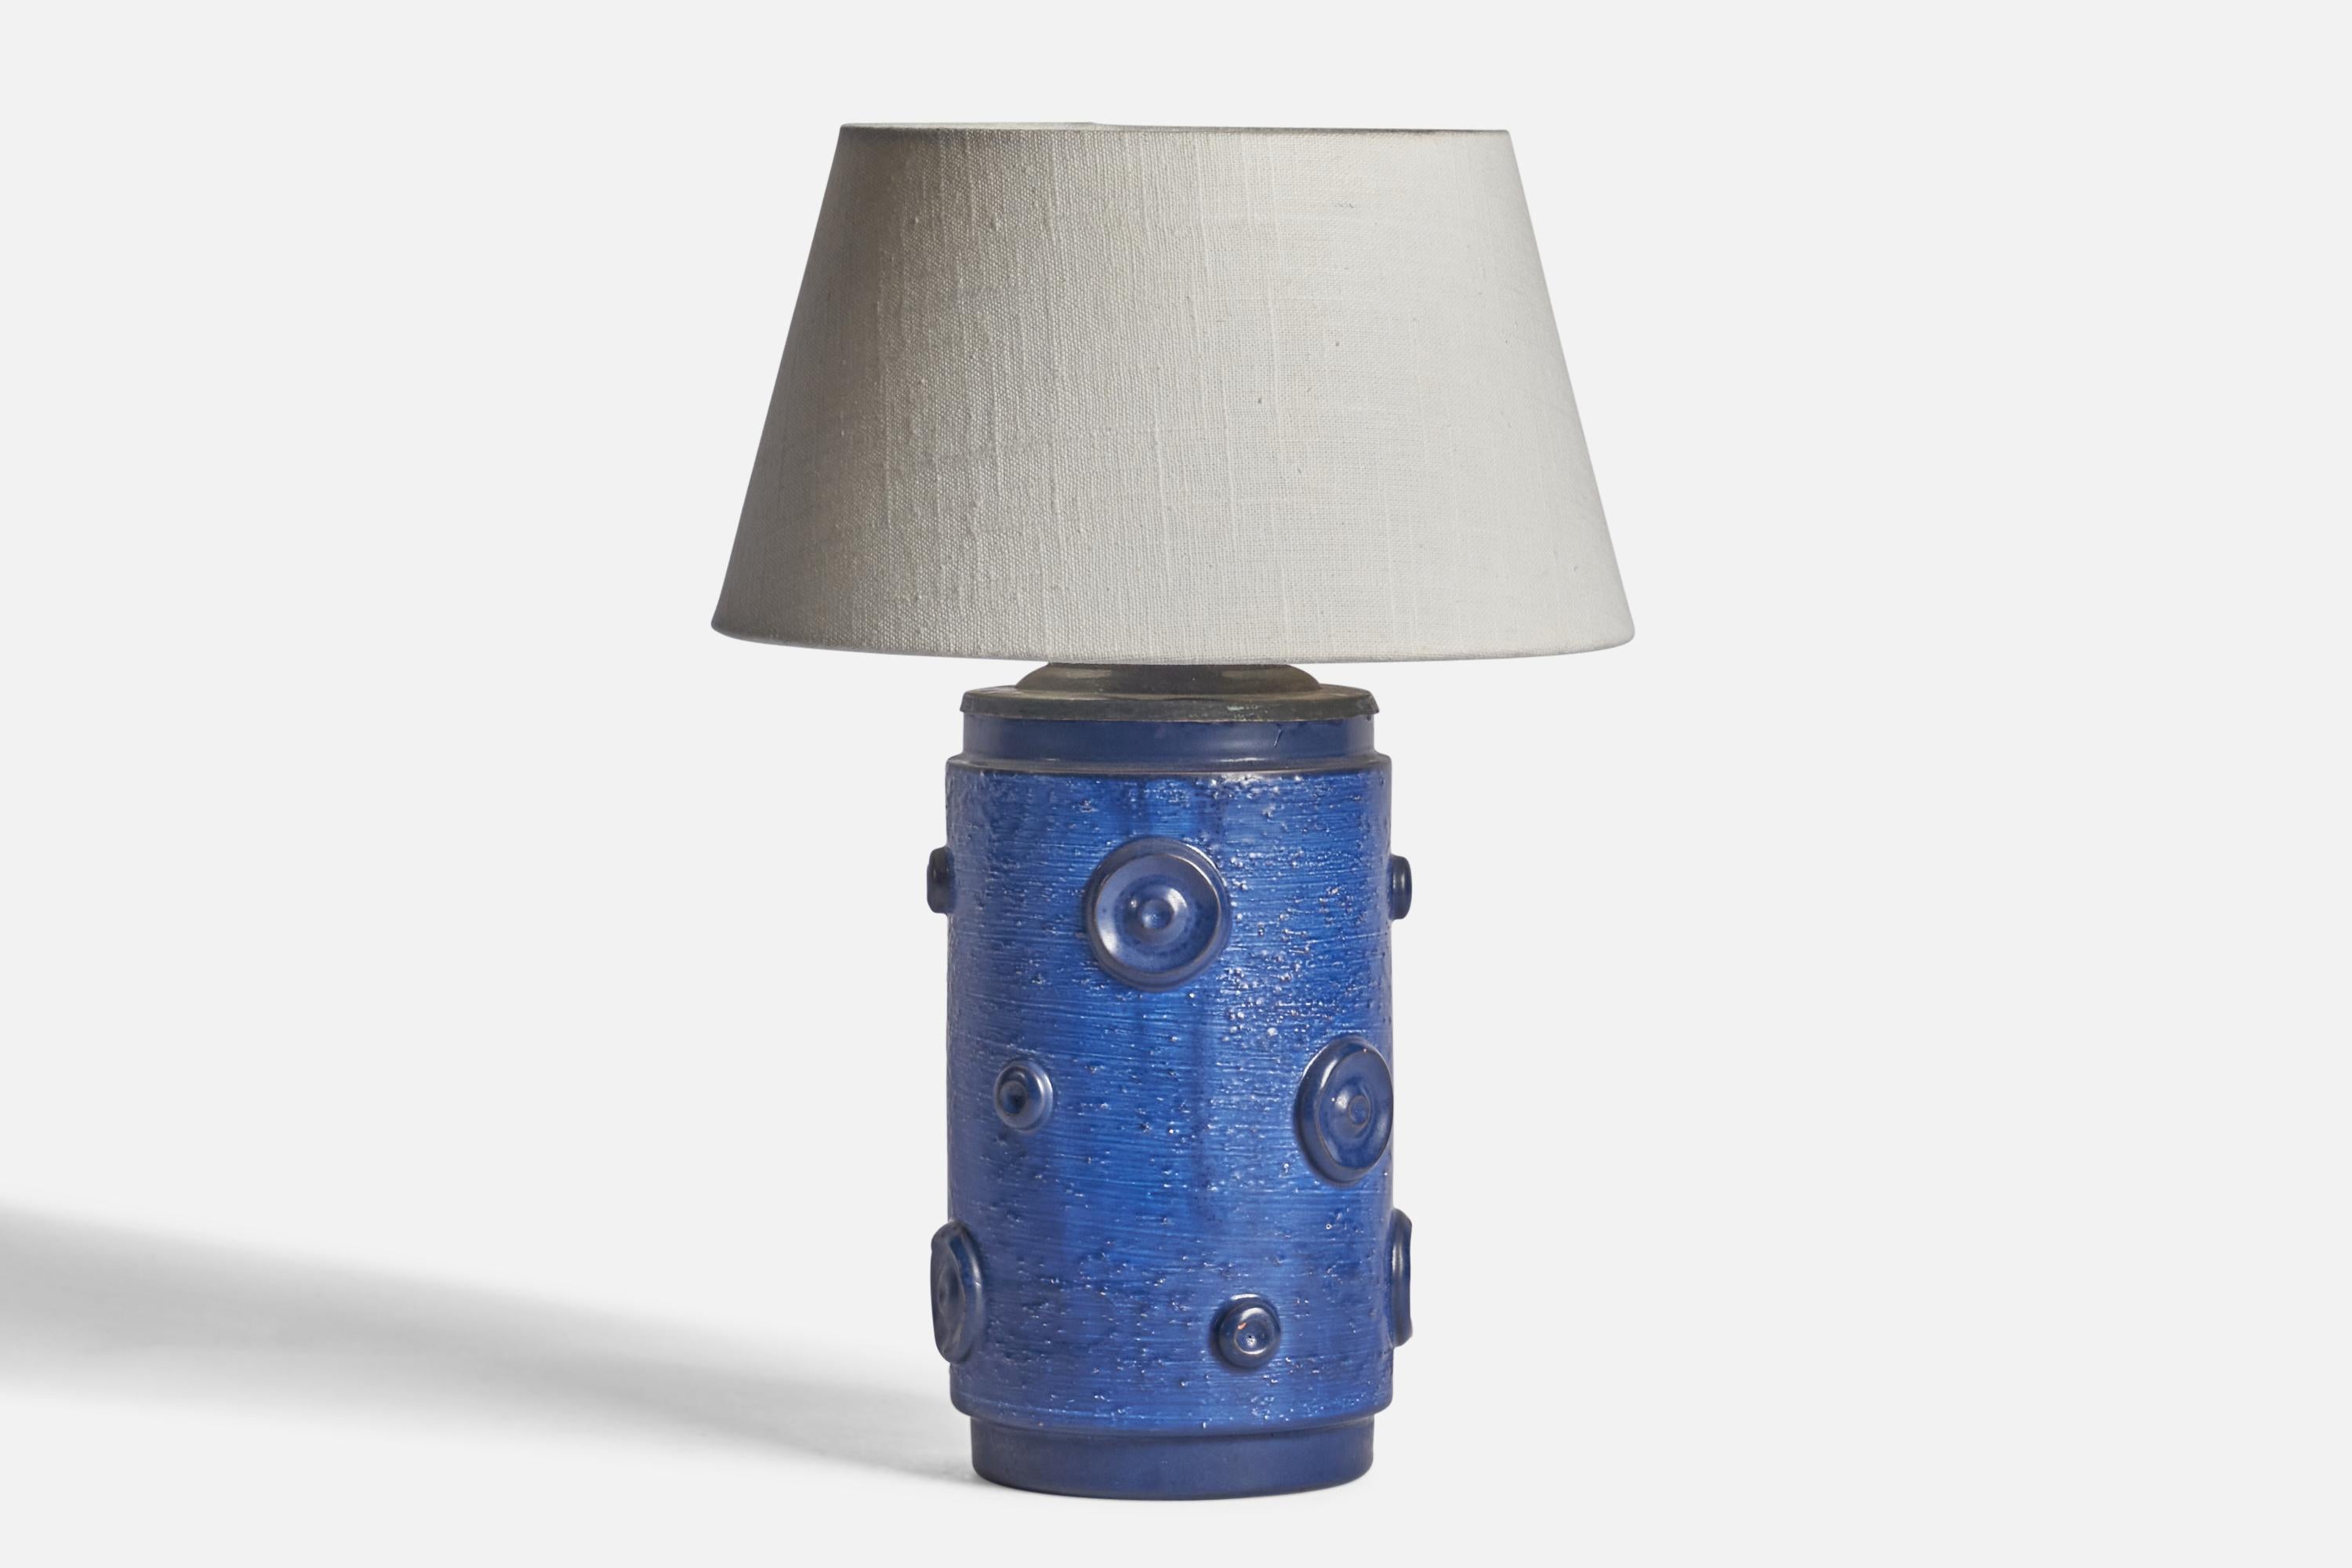 A blue-glazed stoneware table lamp designed by Jerk Werkmäster and produced by Nittsjö, Sweden, 1930s.

Dimensions of Lamp (inches): 11.25